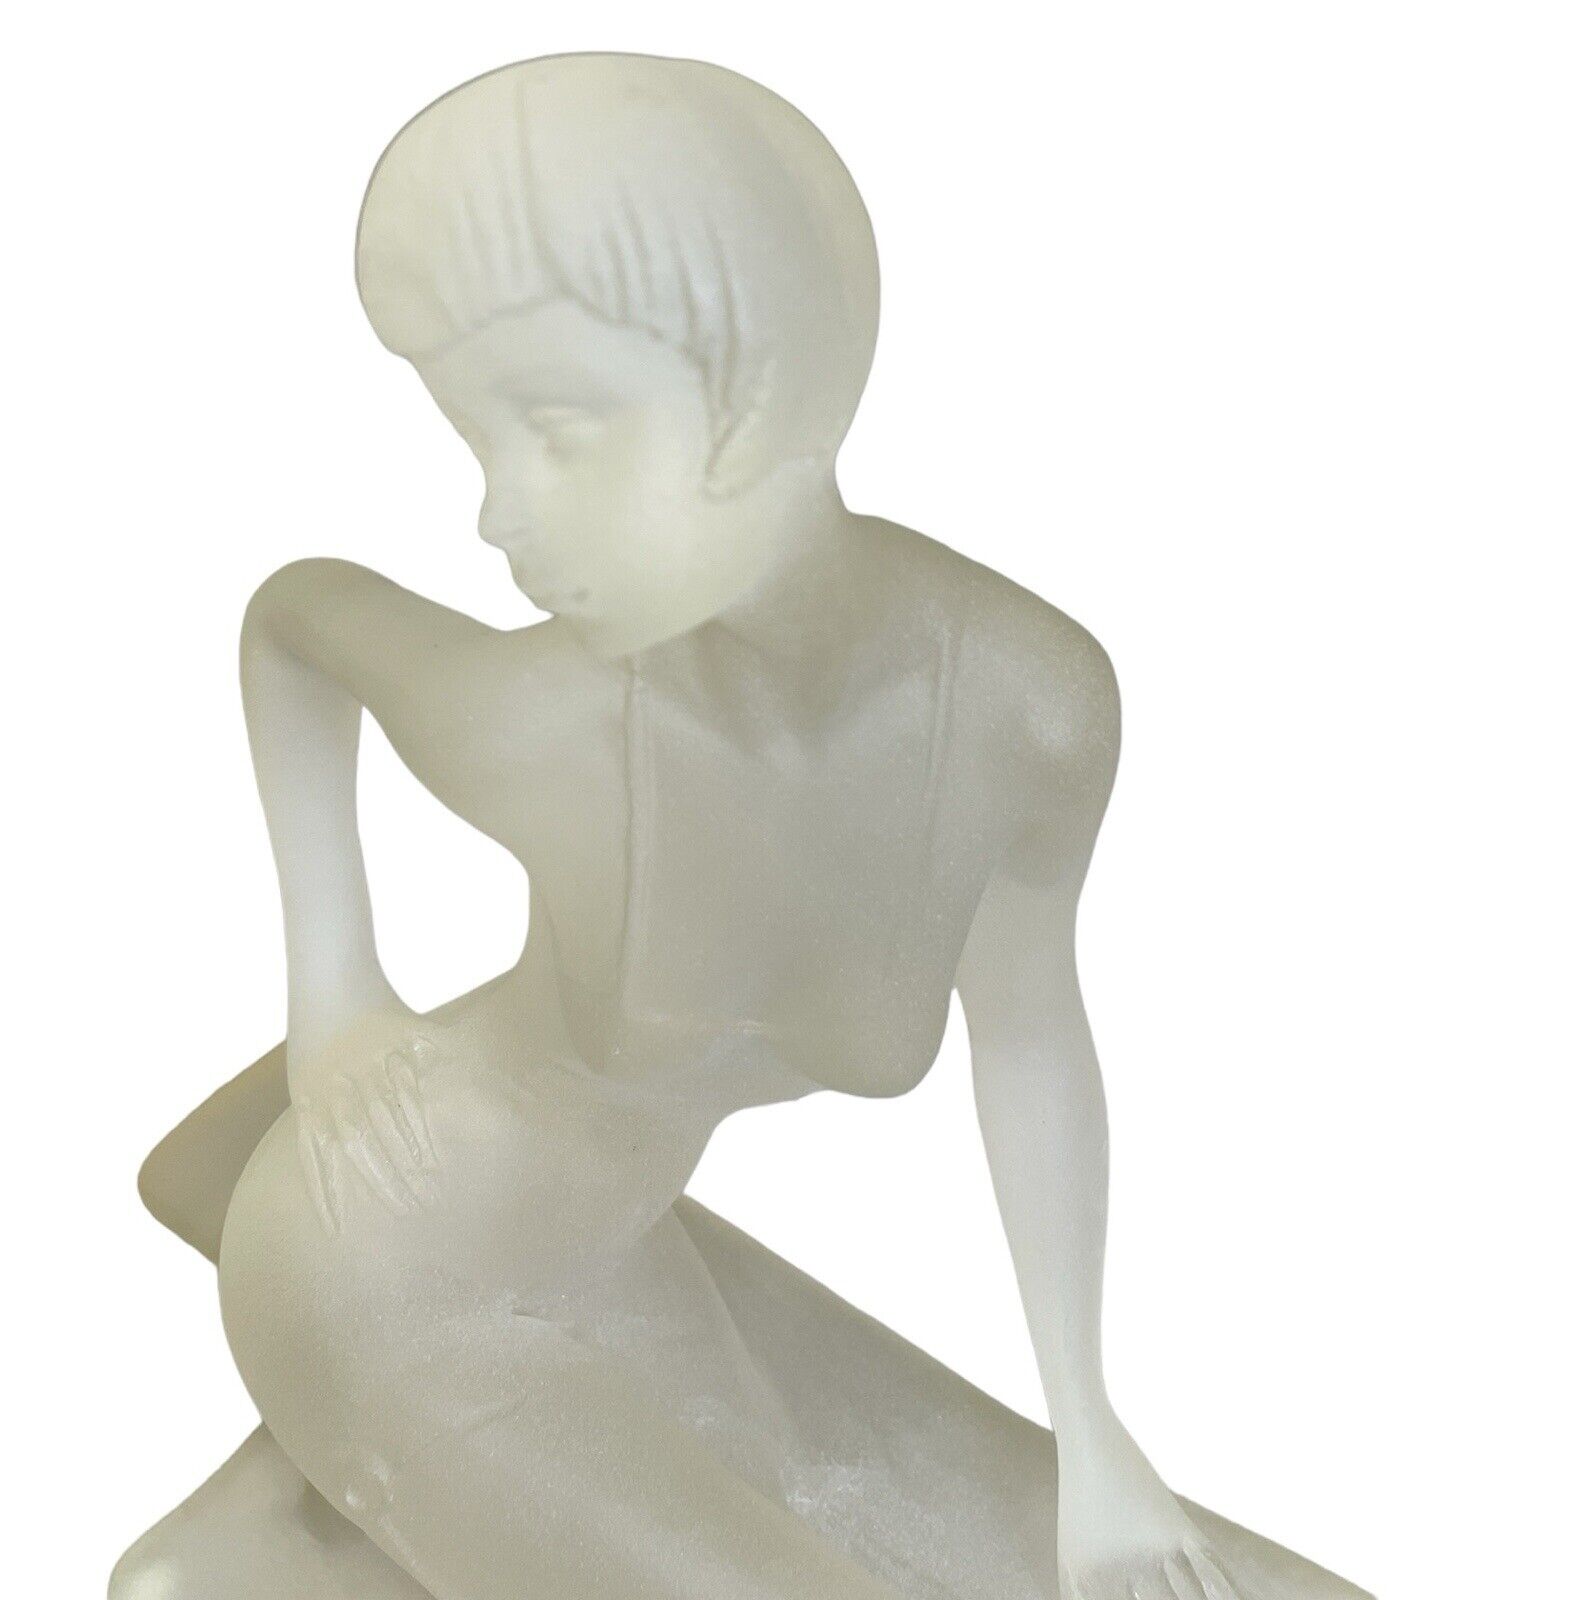 Mirage Ronkonkoma Woman Figure Art Deco Statue Frosted Acrylic Lucite Large NY